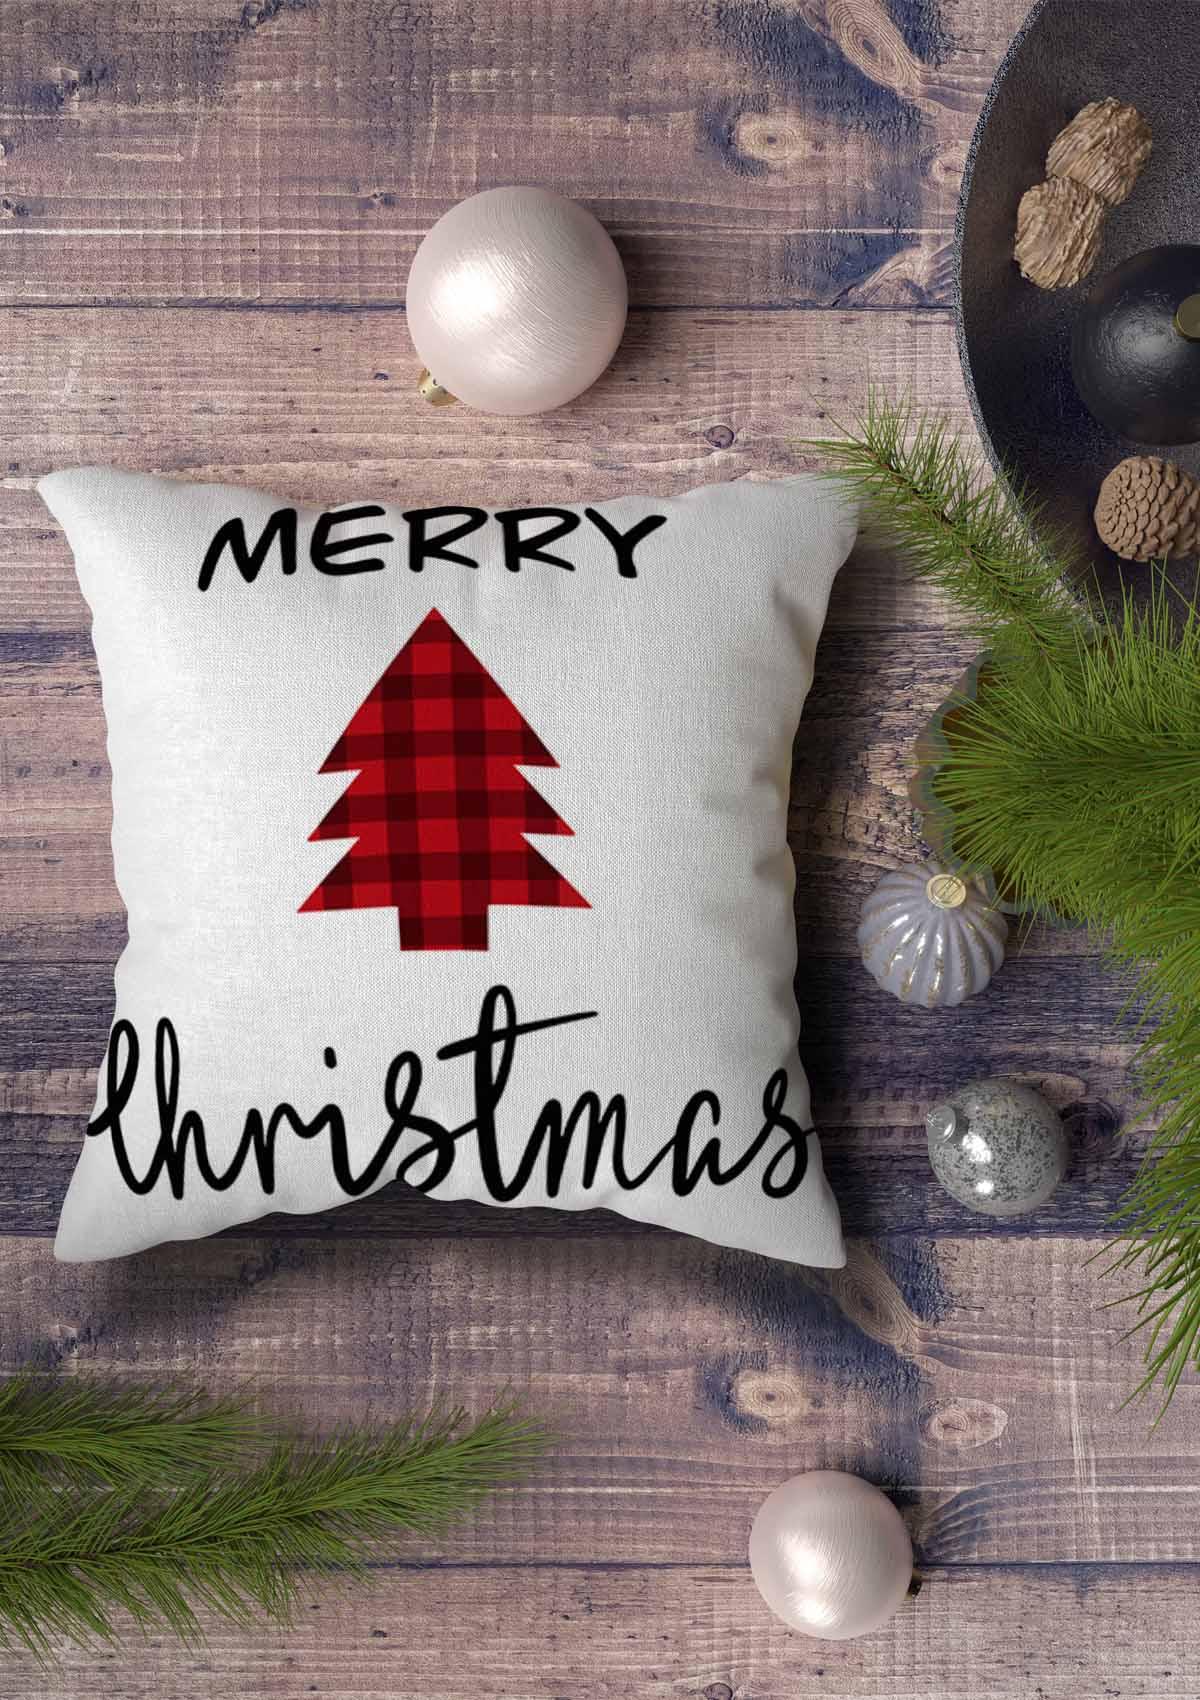 Christmas Cushion Covers UK - Festive holiday-themed cushion covers showcasing a variety of designs. Ideal for transforming home decor during the holiday season.